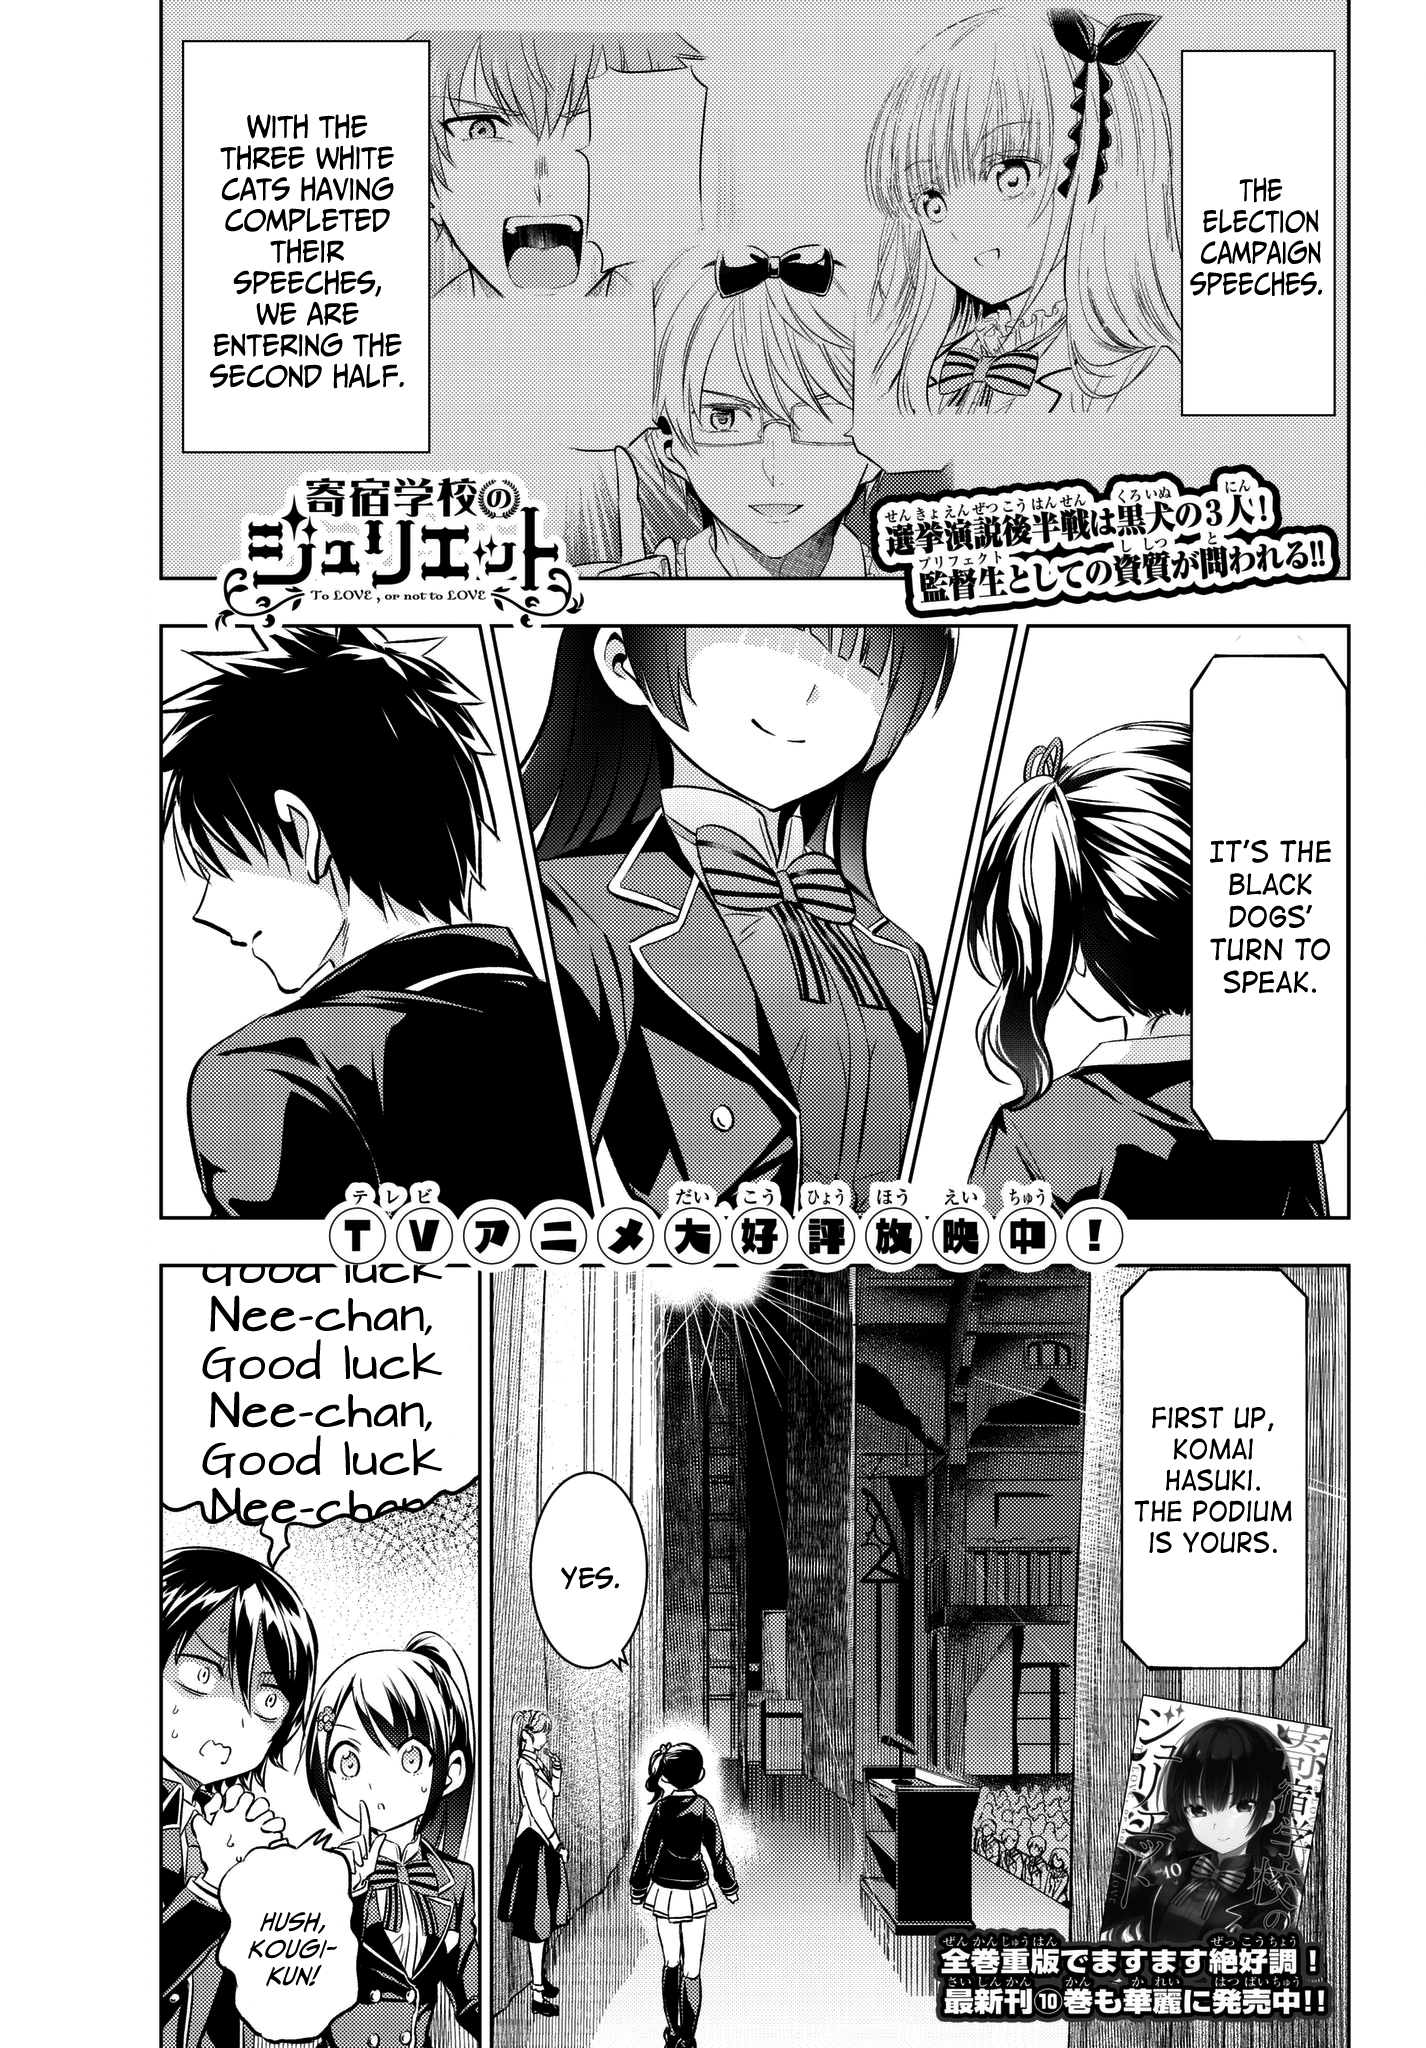 Kishuku Gakkou No Juliet Vol.12 Chapter 81: Romio And The Student Election Assembly (Part Ii) - Picture 1